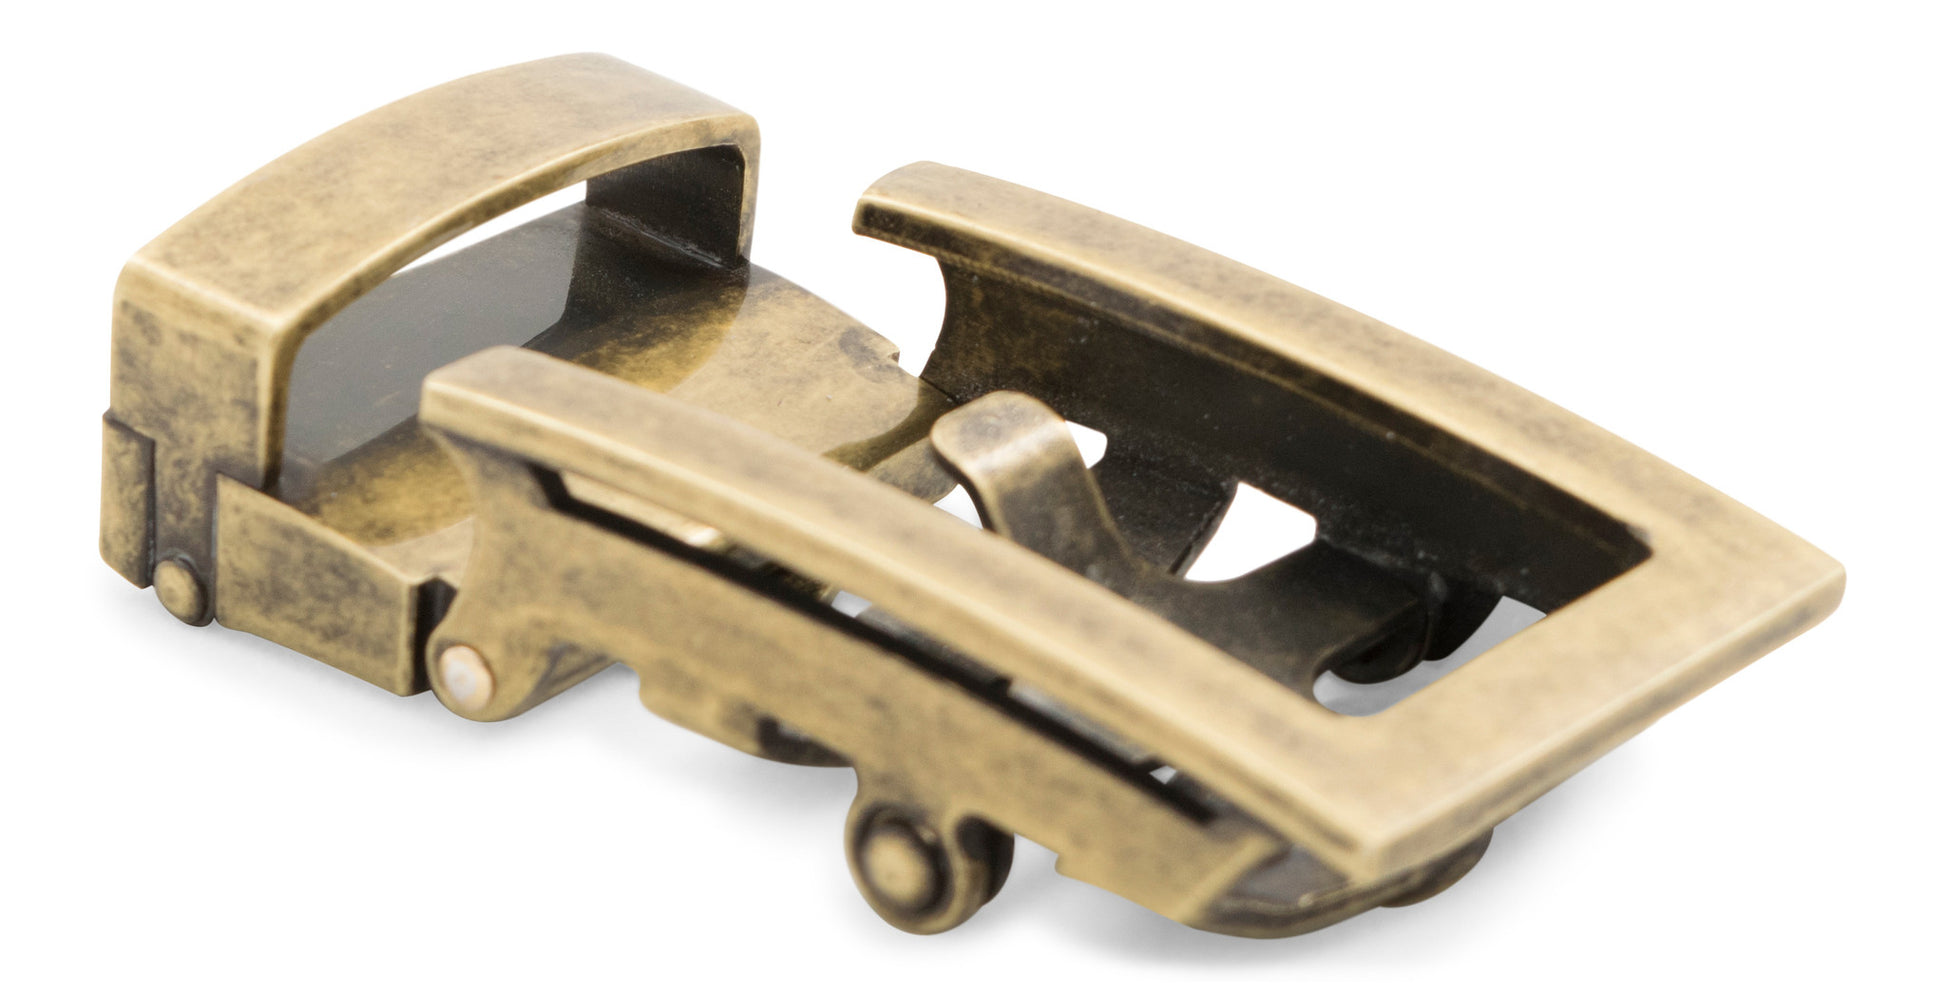 Men's traditional ratchet belt buckle in antiqued gold with a 1.25-inch width, oblique view.